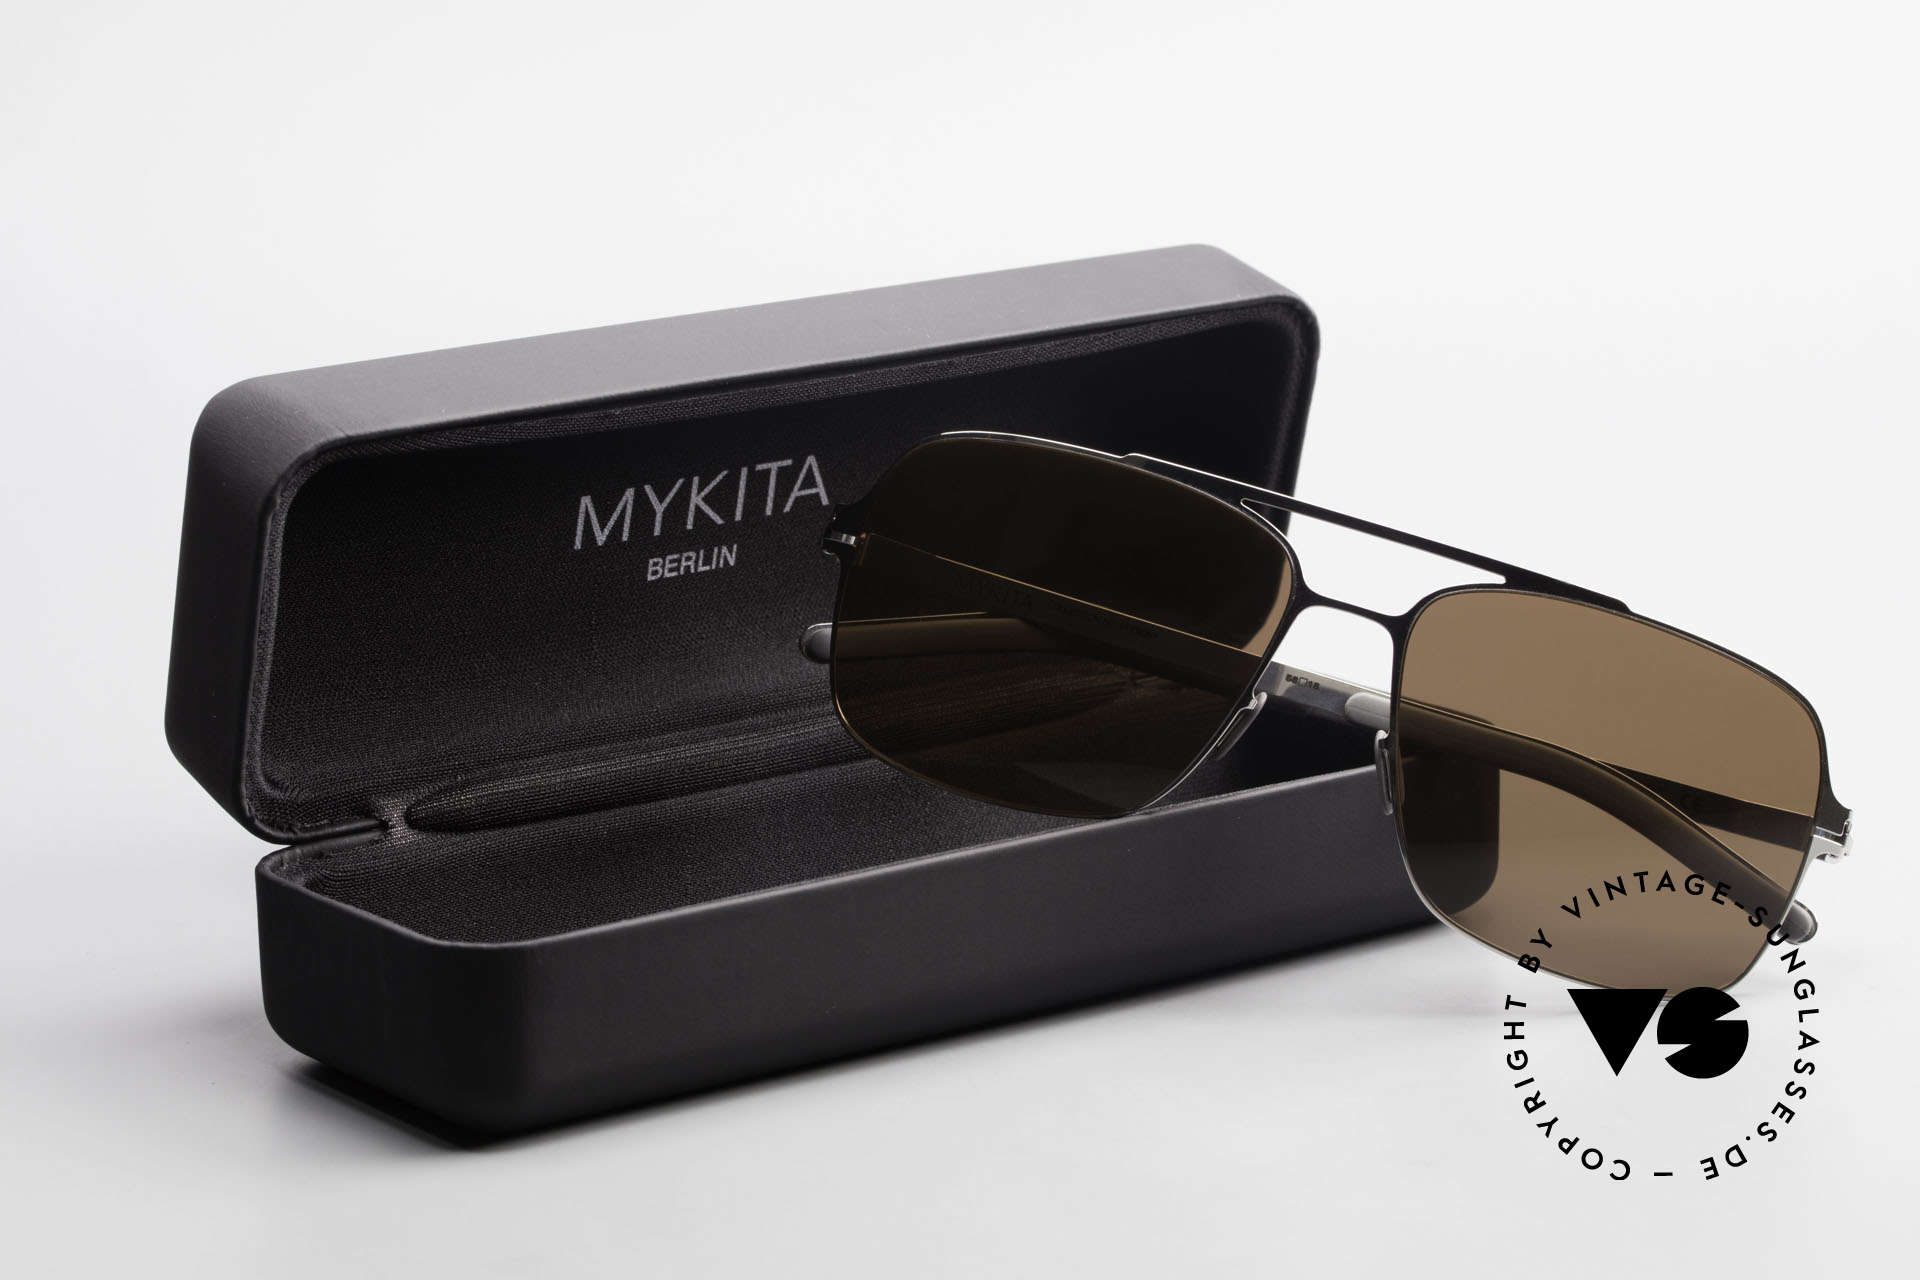 Mykita Troy Collection No 1 Mykita Shades, Size: large, Made for Men